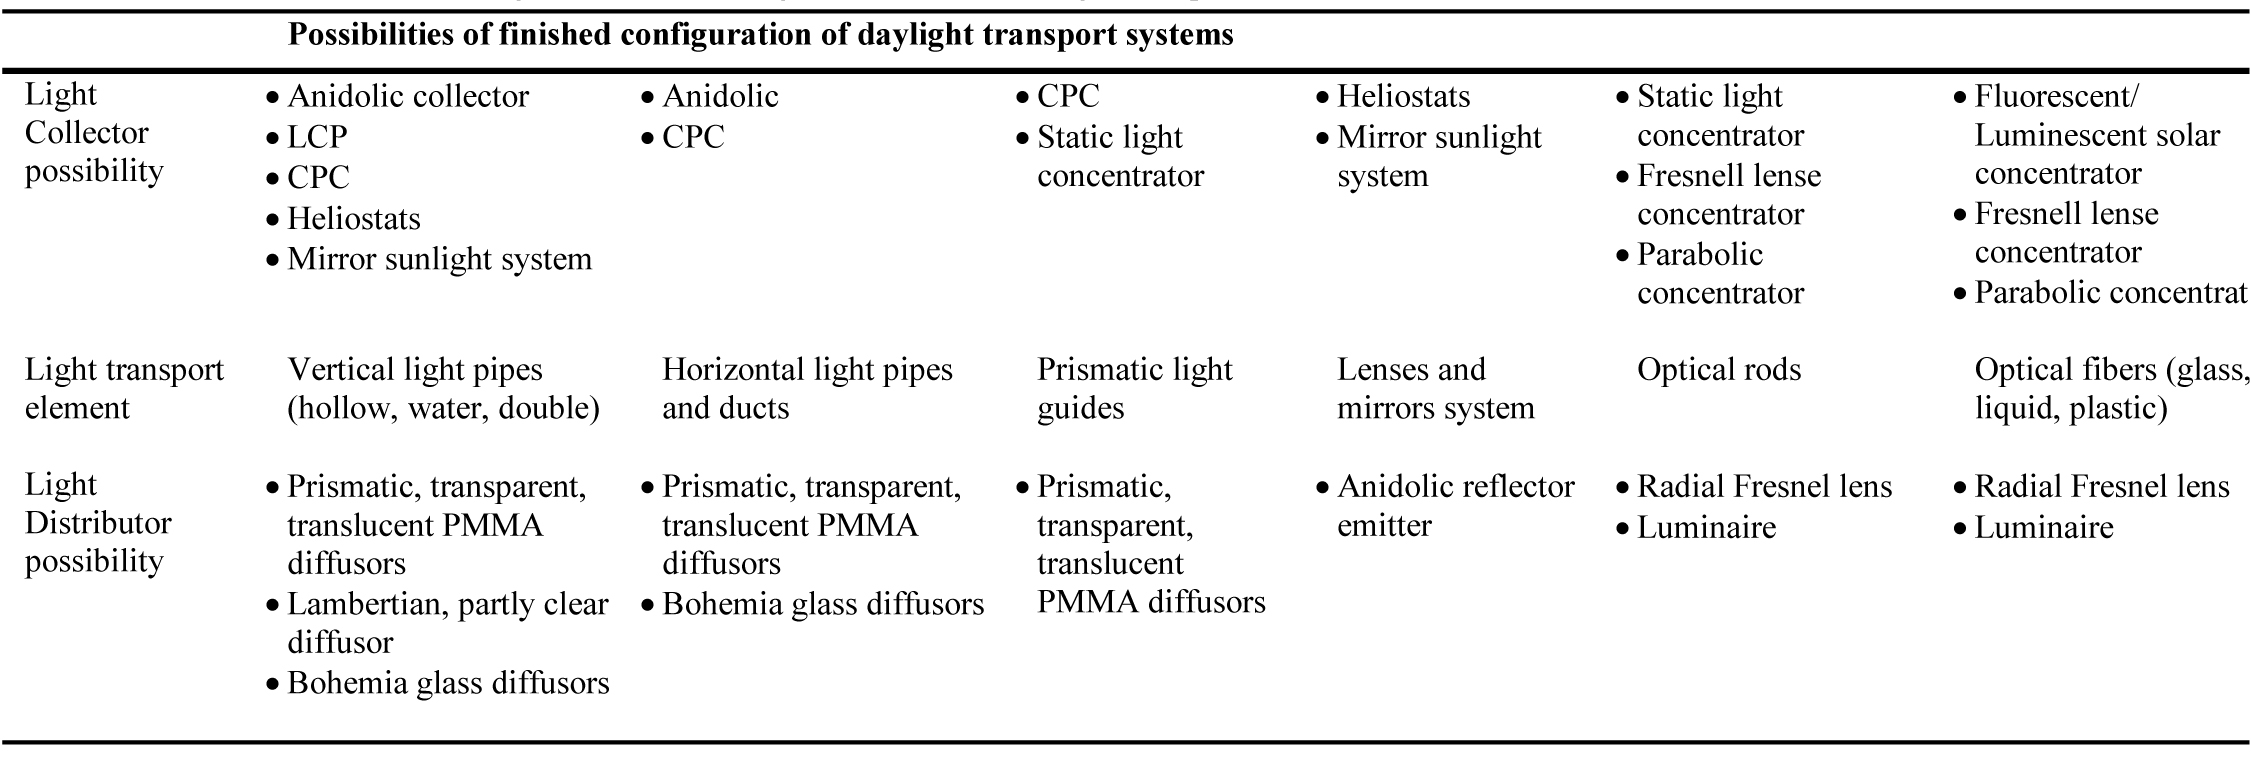 Most usual combination of light collectors and light distributors for a light transport element.